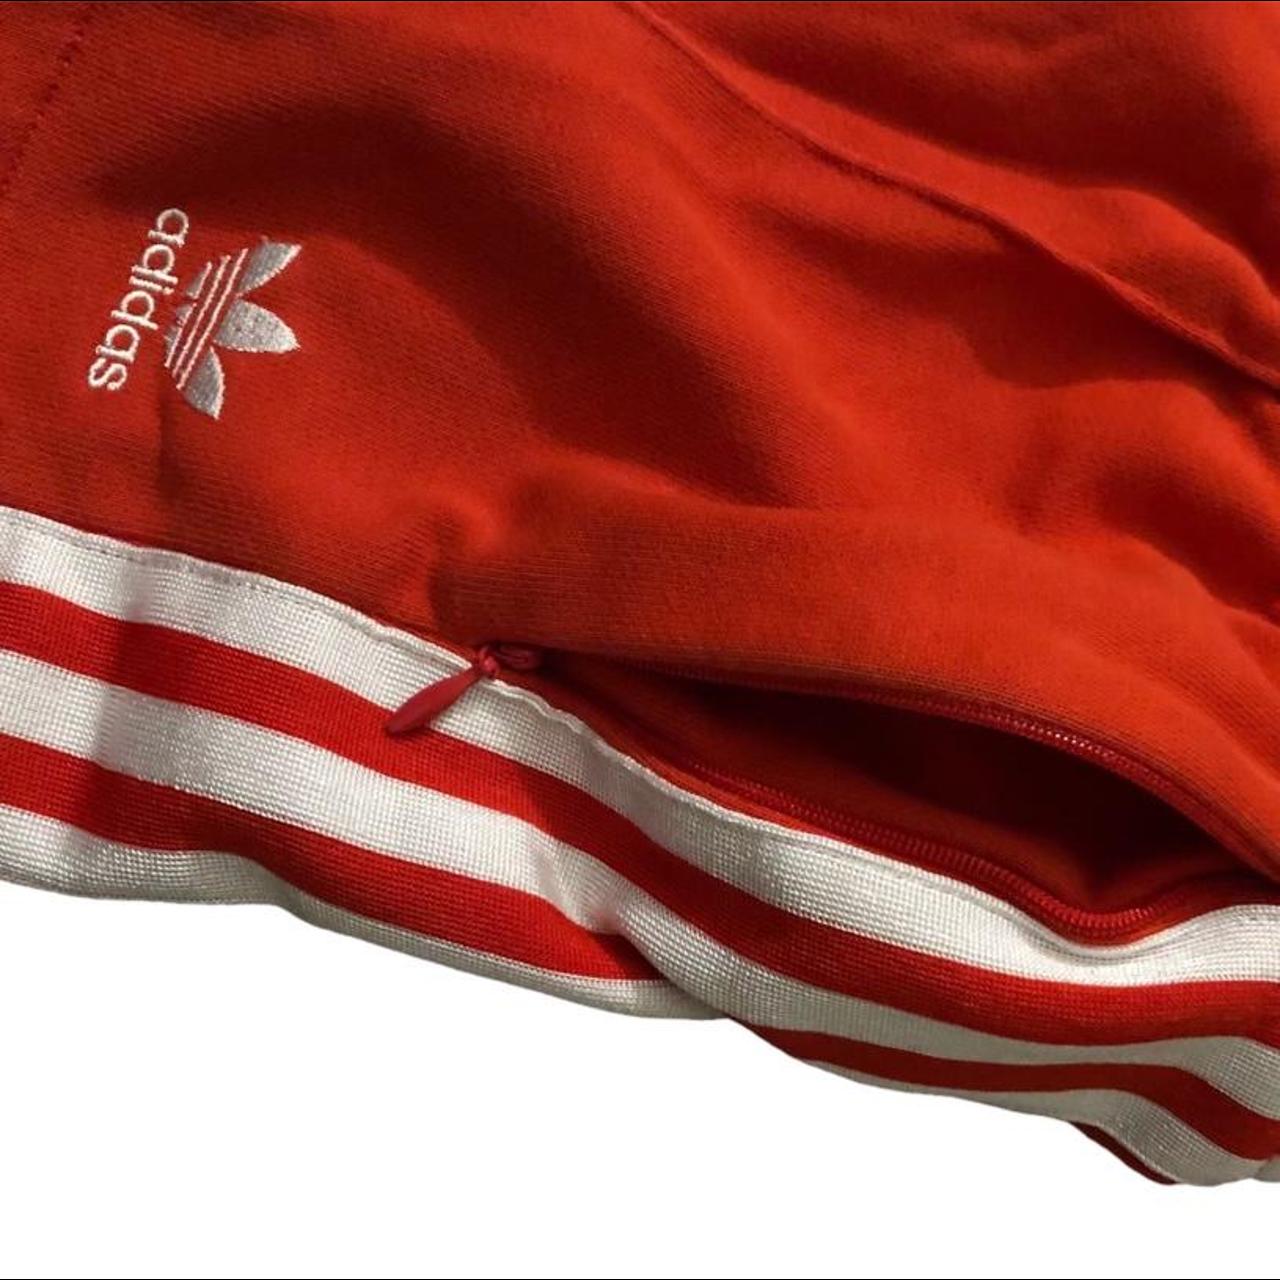 Adidas Women's Red and White Shorts (3)